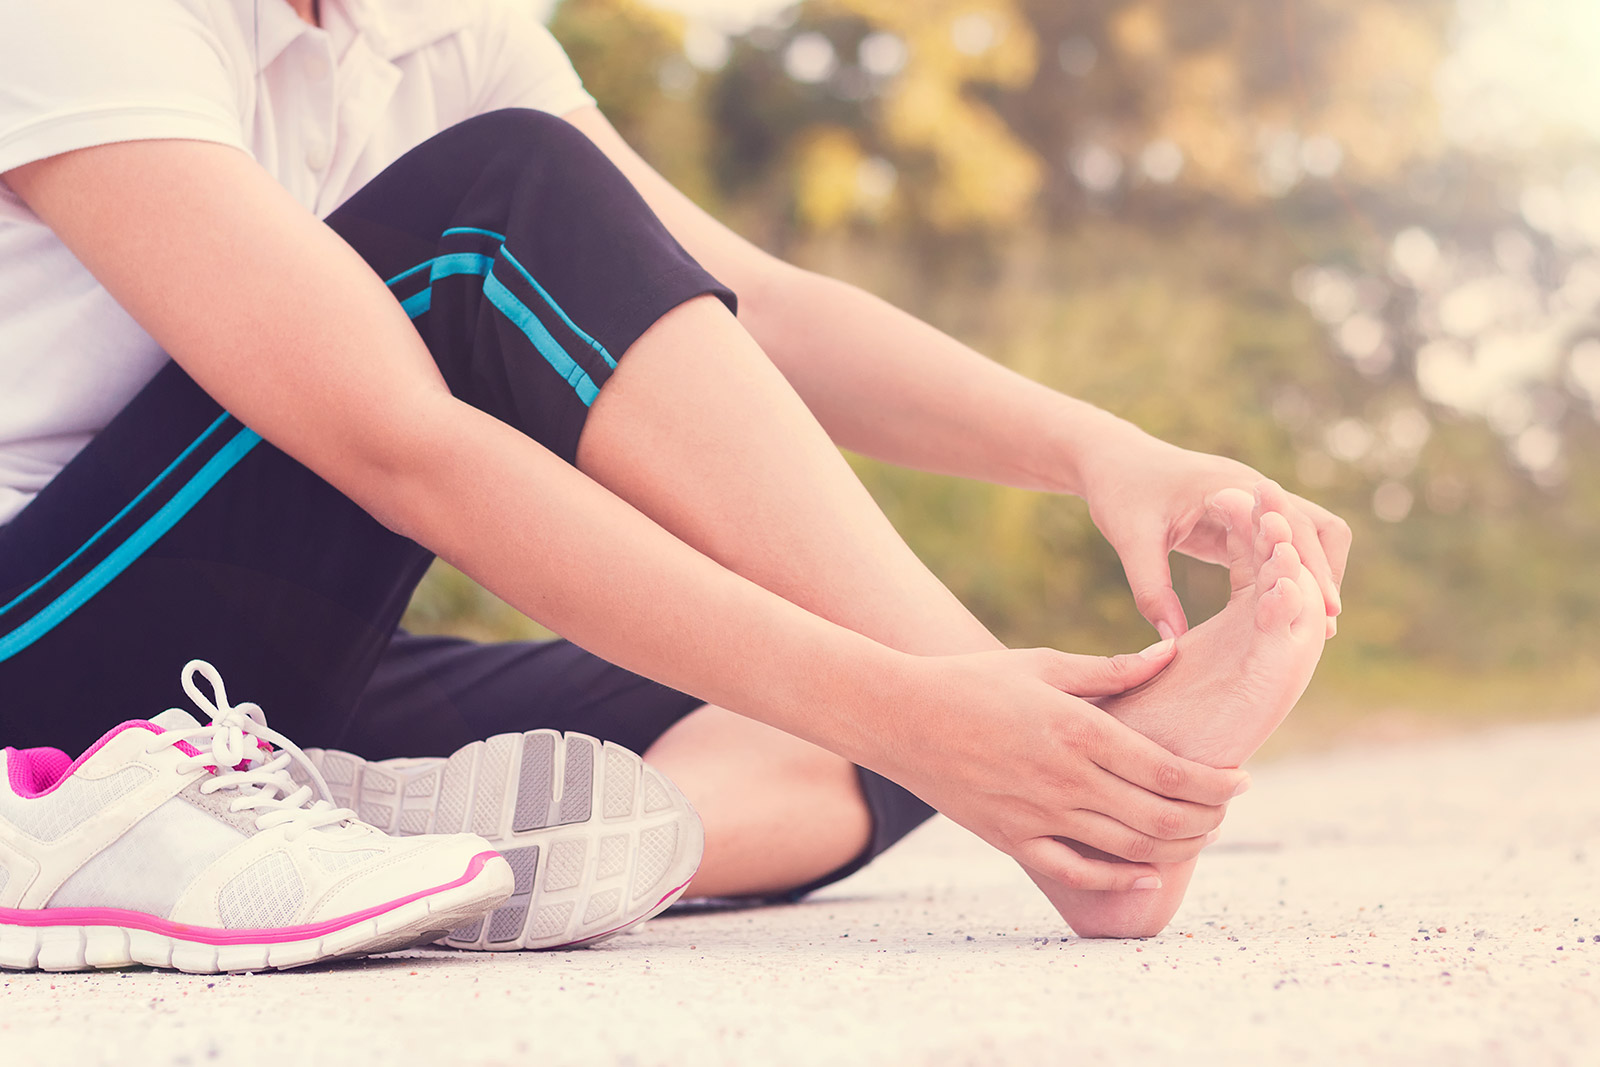 Sports Medicine Foot & Ankle Injuries | Dr. Sarang Desai | Contact The Best 